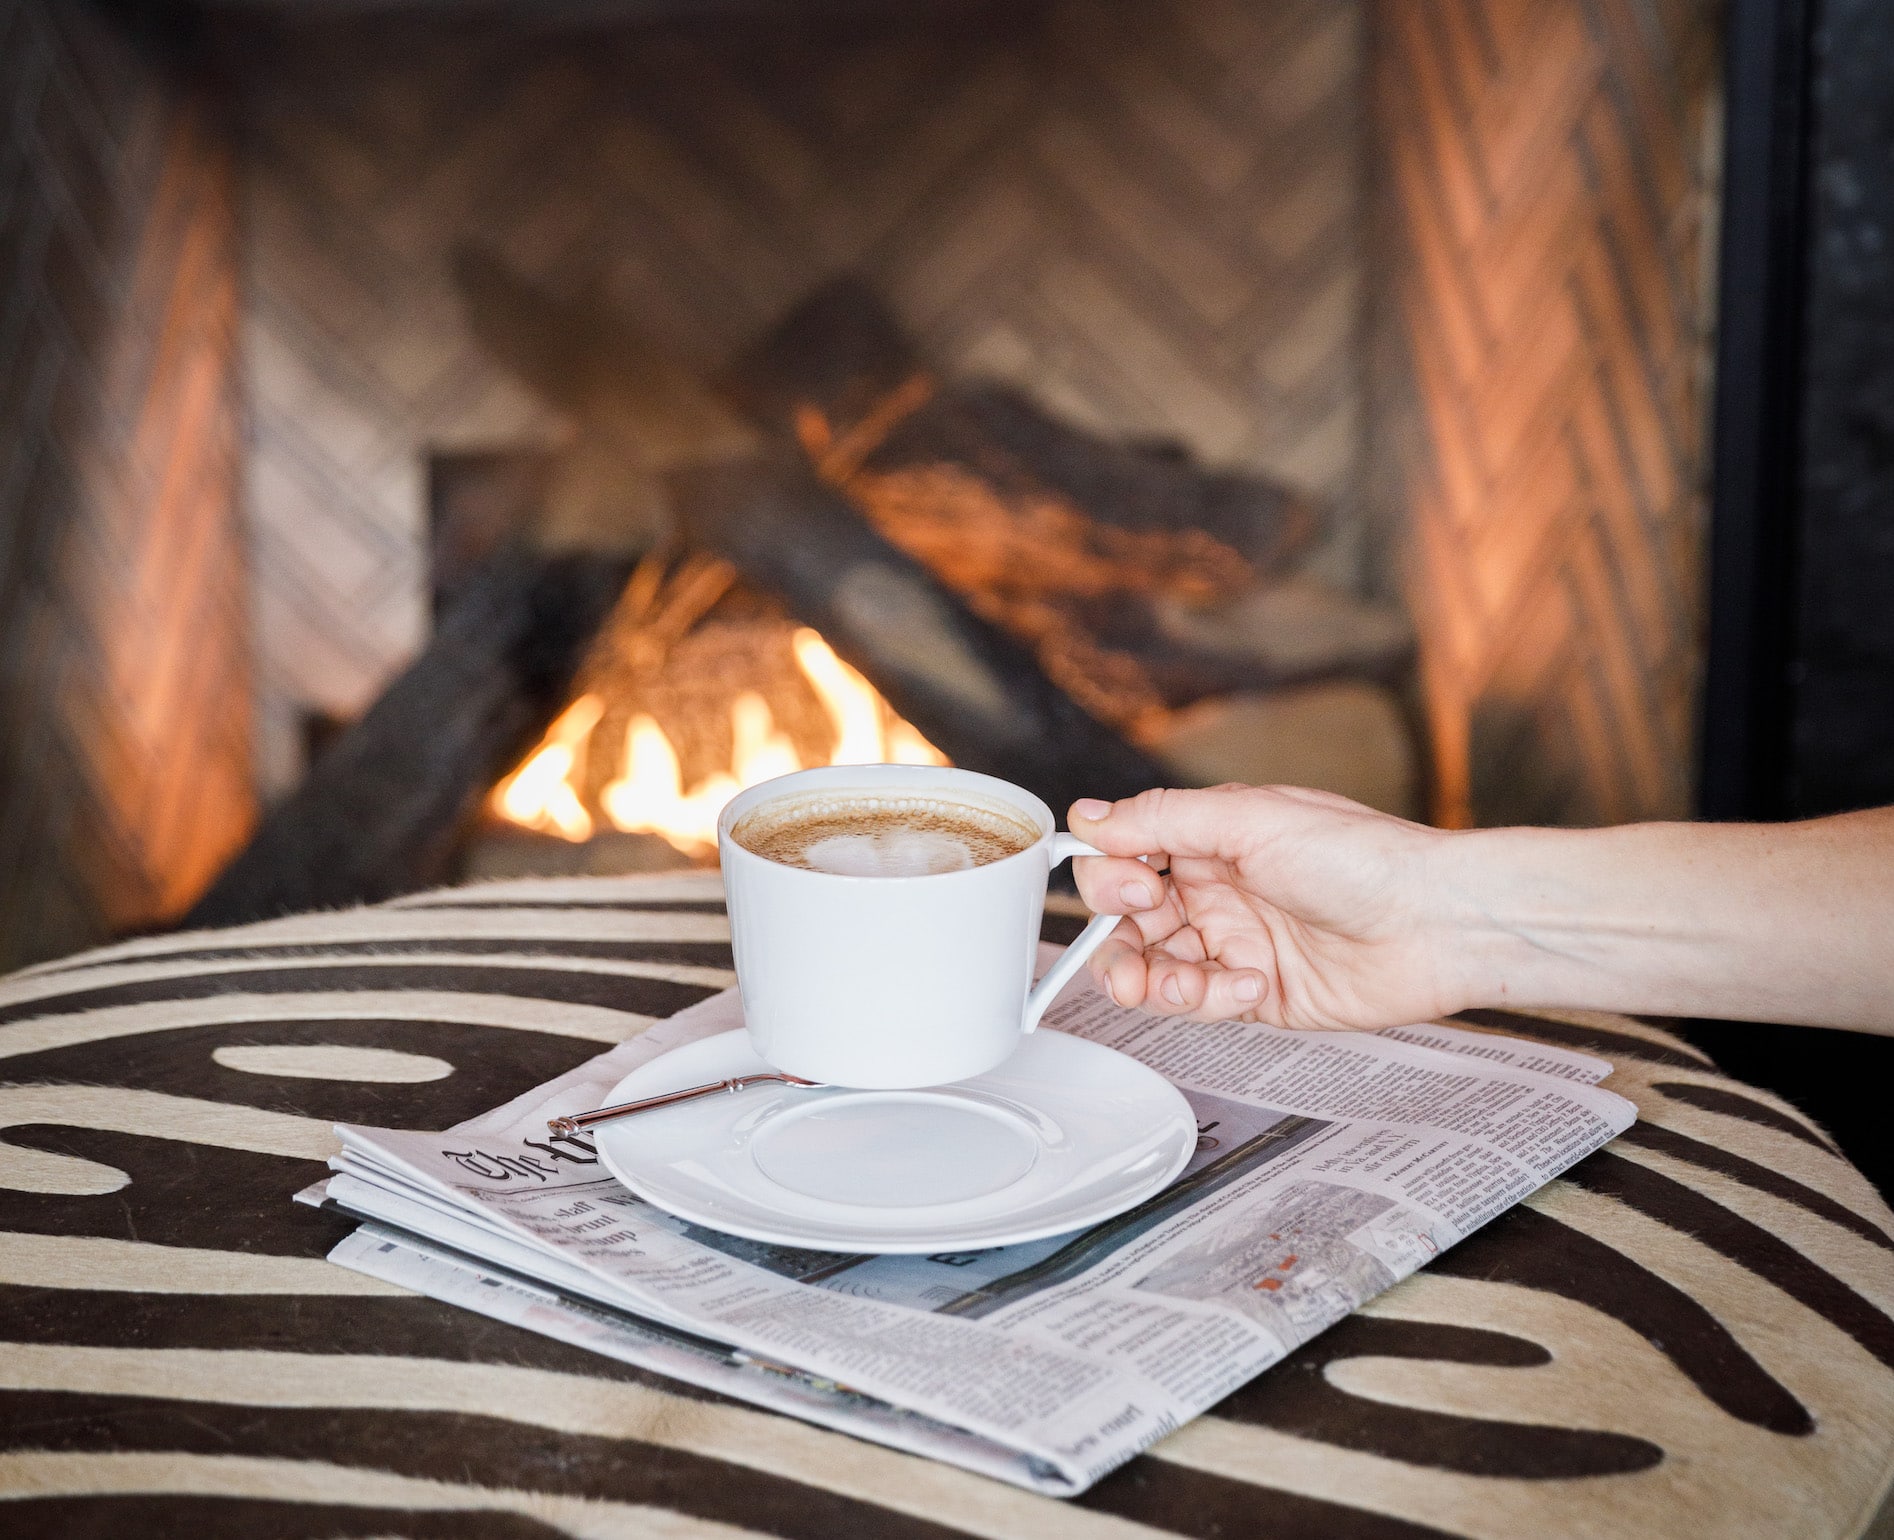 Woman reaching for a cappucino in front of a fireplace.